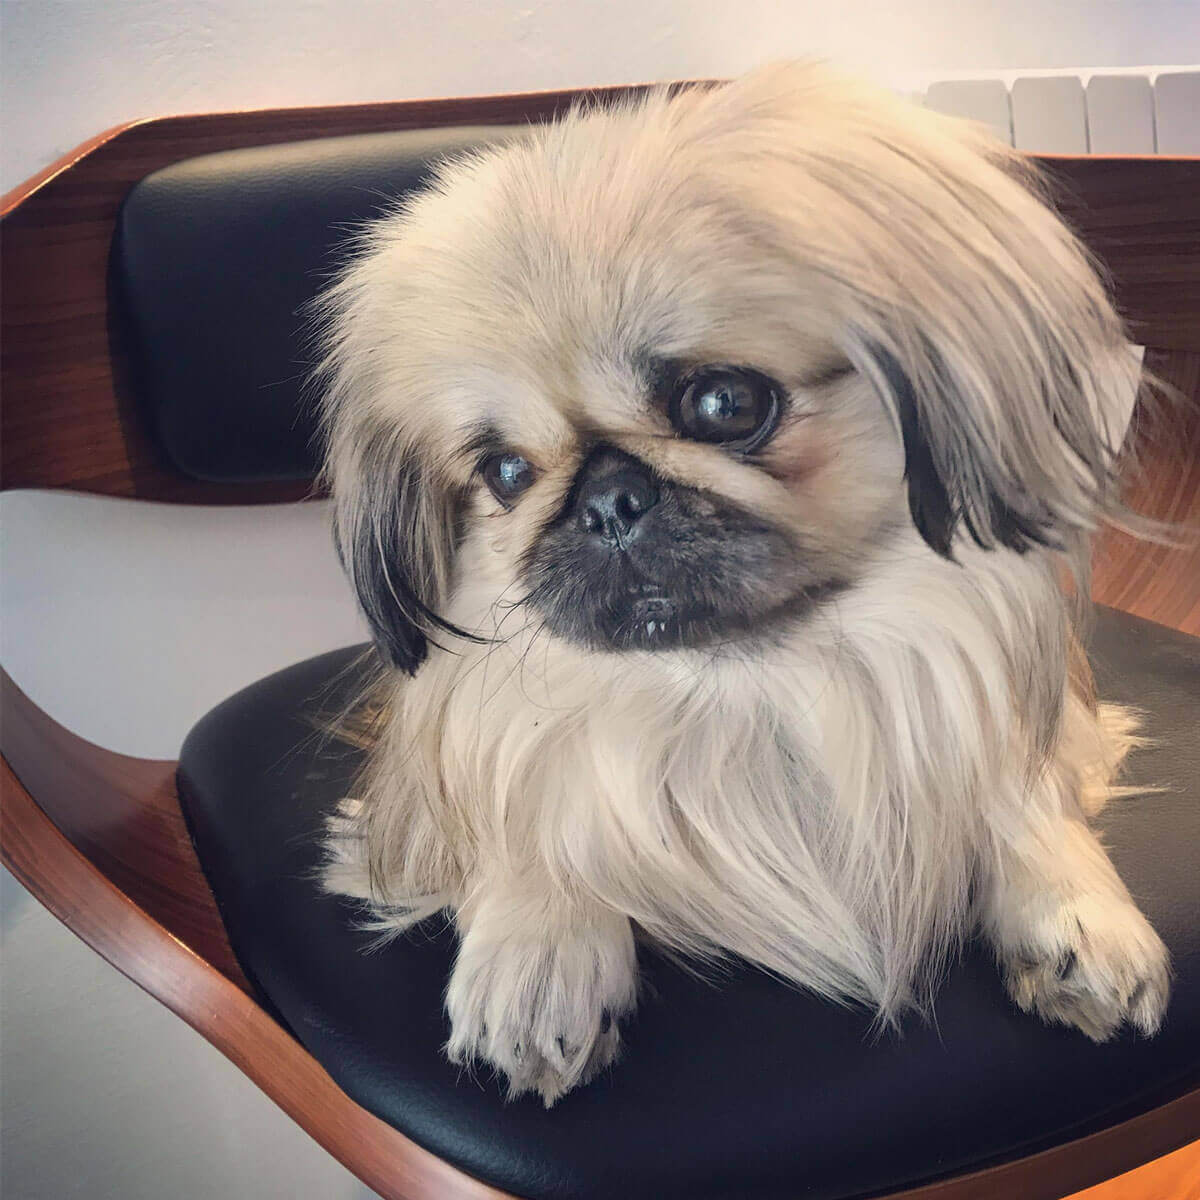 Doggy member Penelope, a Pekingese sitting on a chair